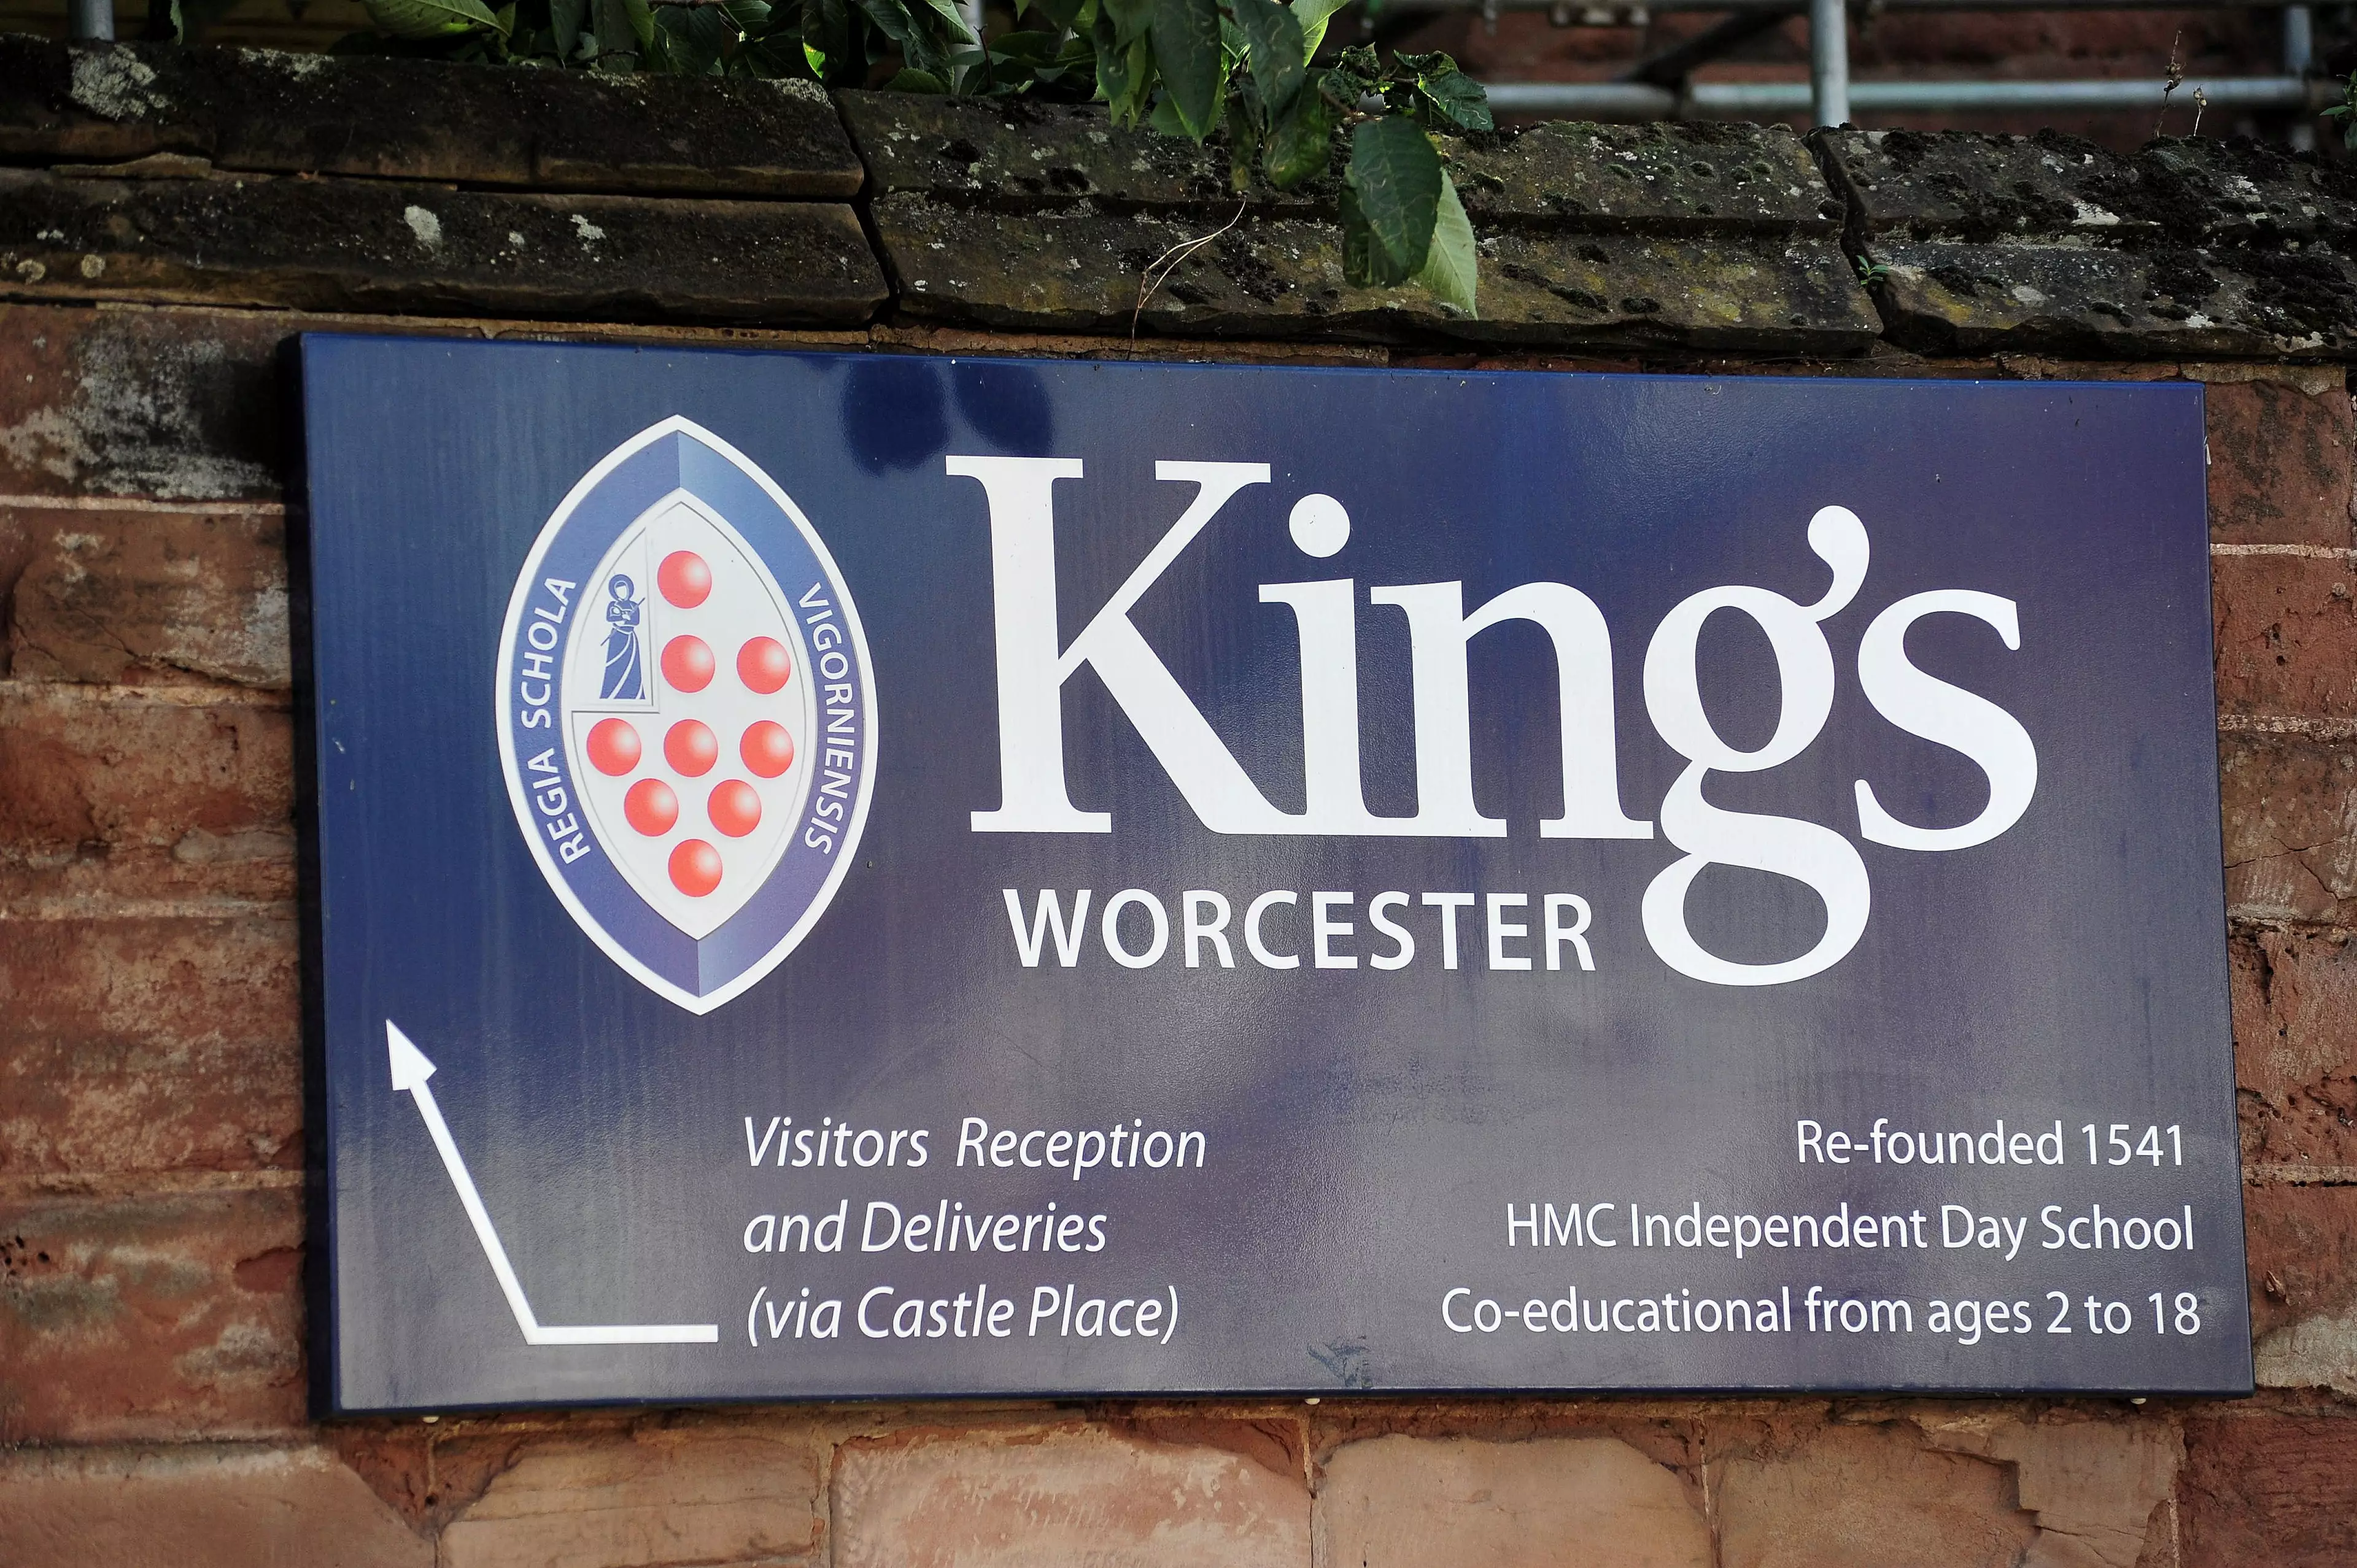 Staff at King's School in Worcester have been accused of enforcing 